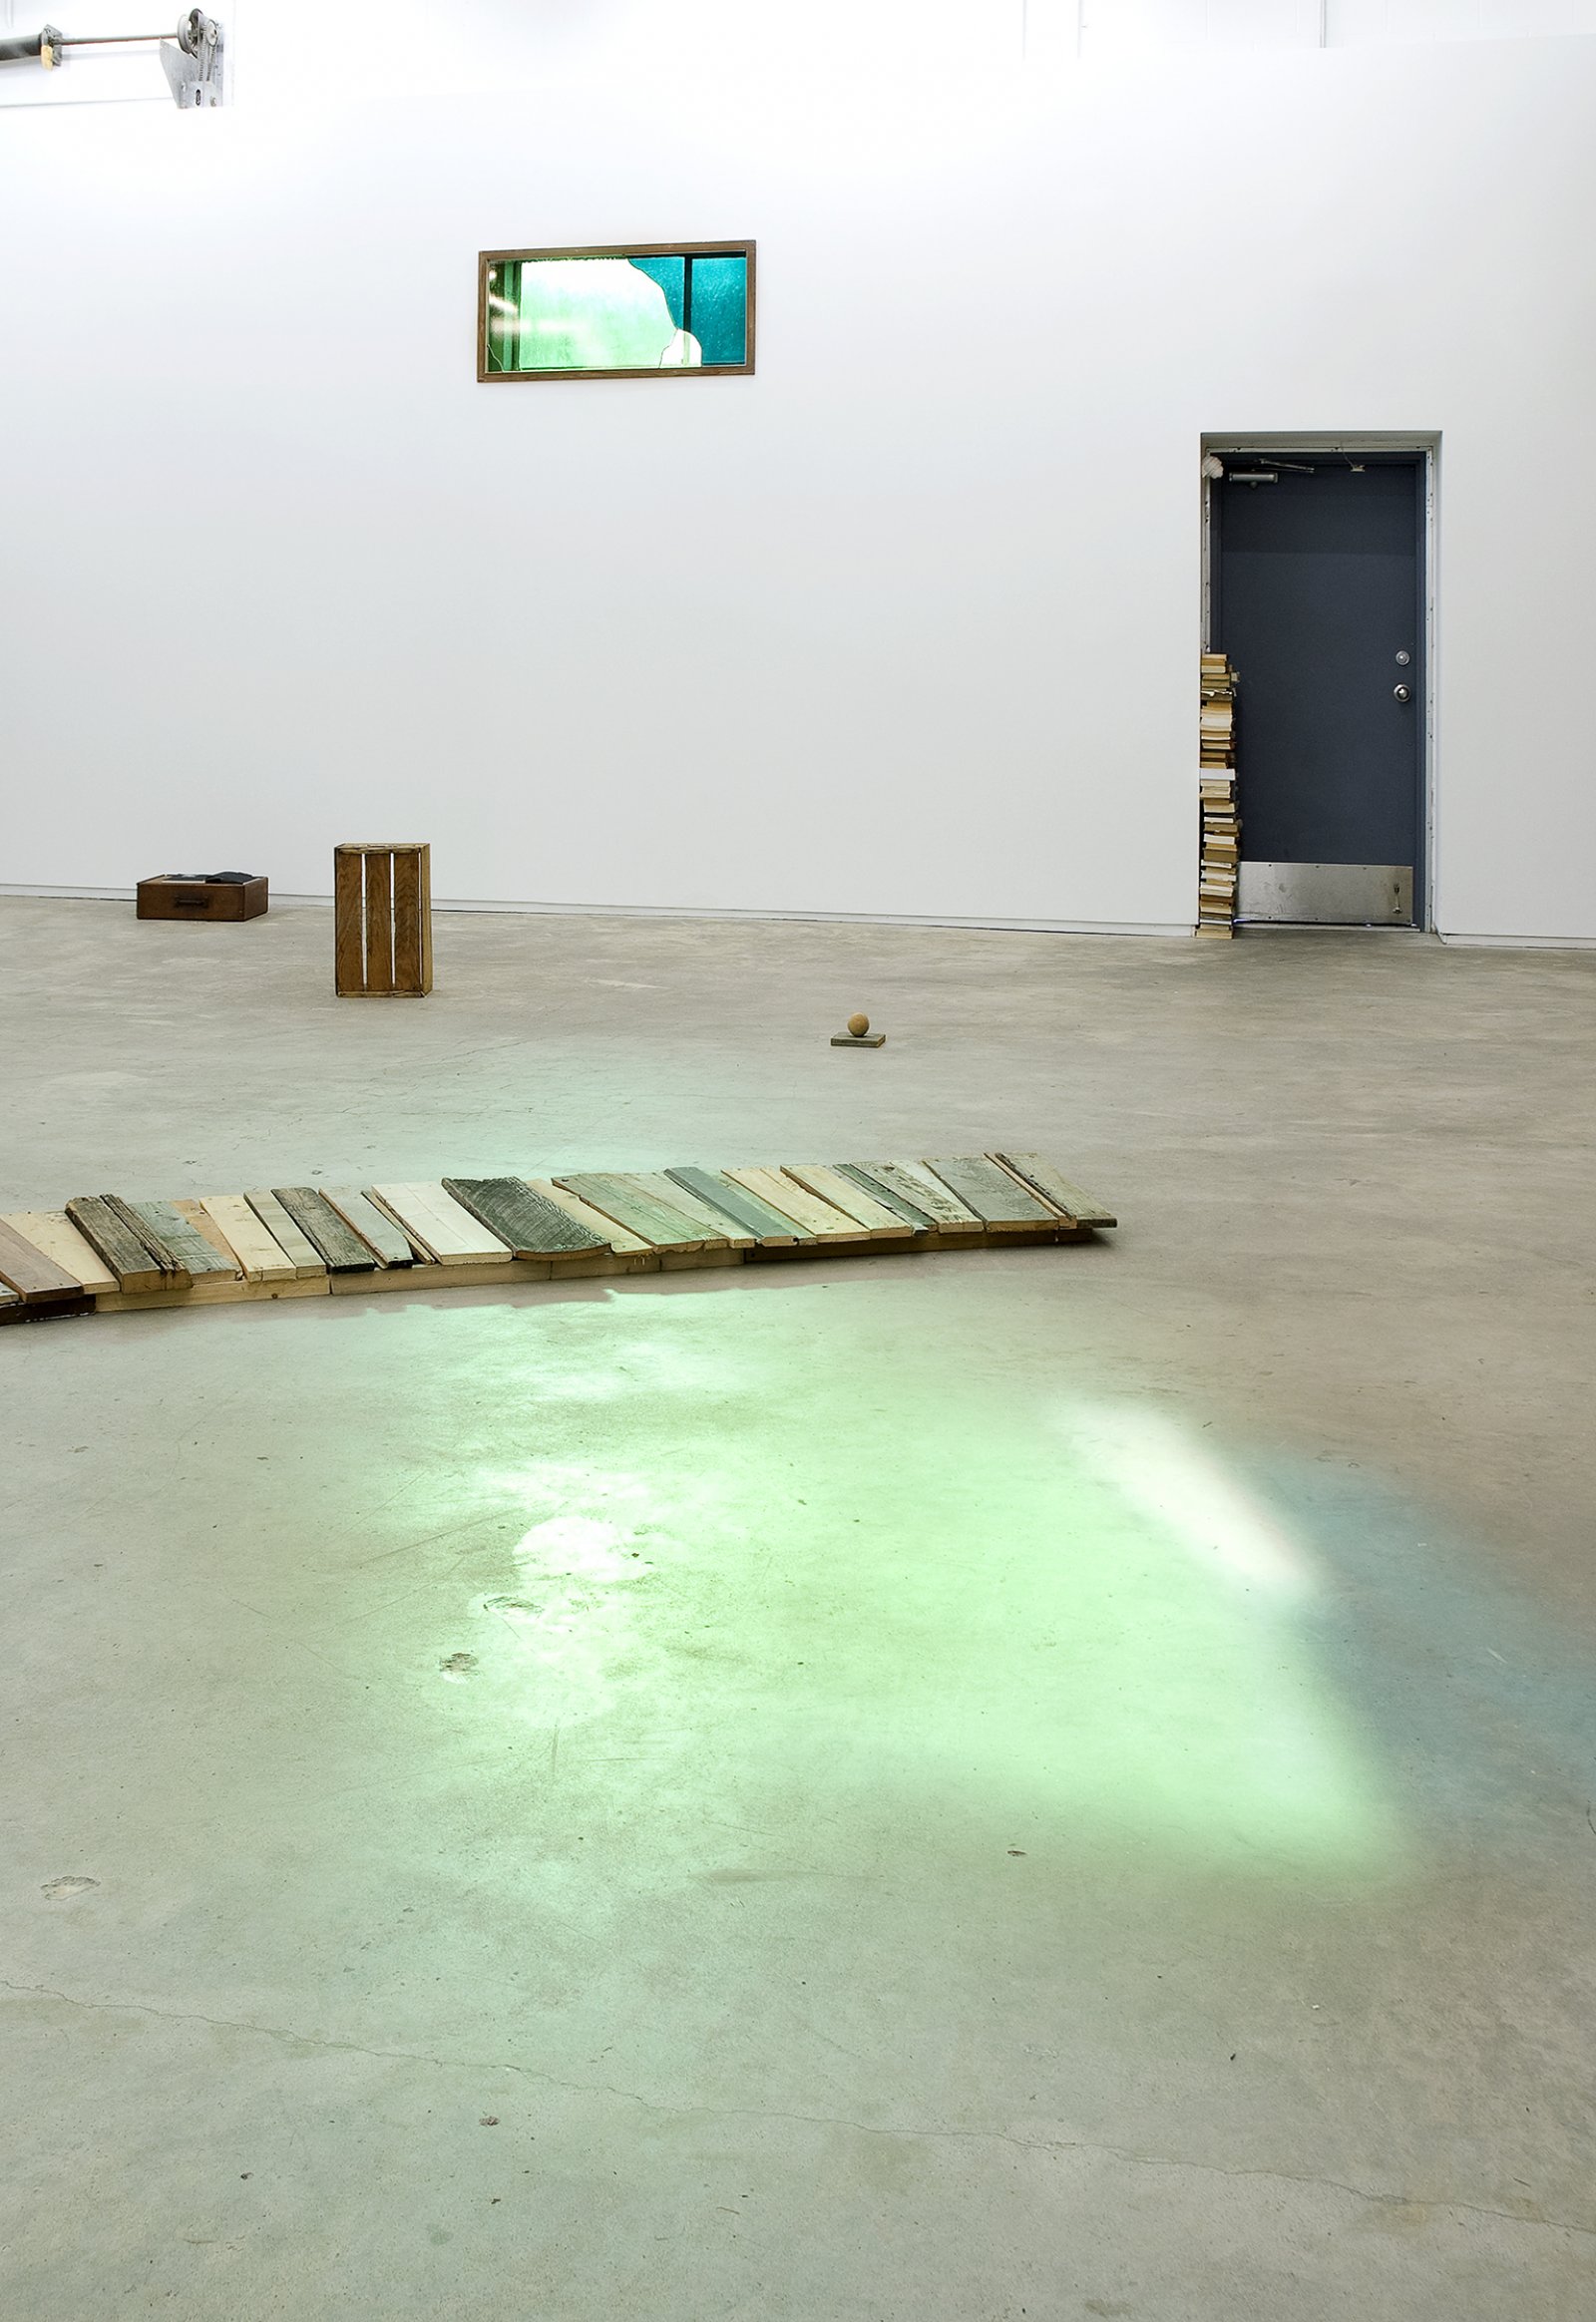 Gareth Moore, installation view, Uncertain Pilgrimage, Catriona Jeffries, 2009 ​​ by Ashes Withyman